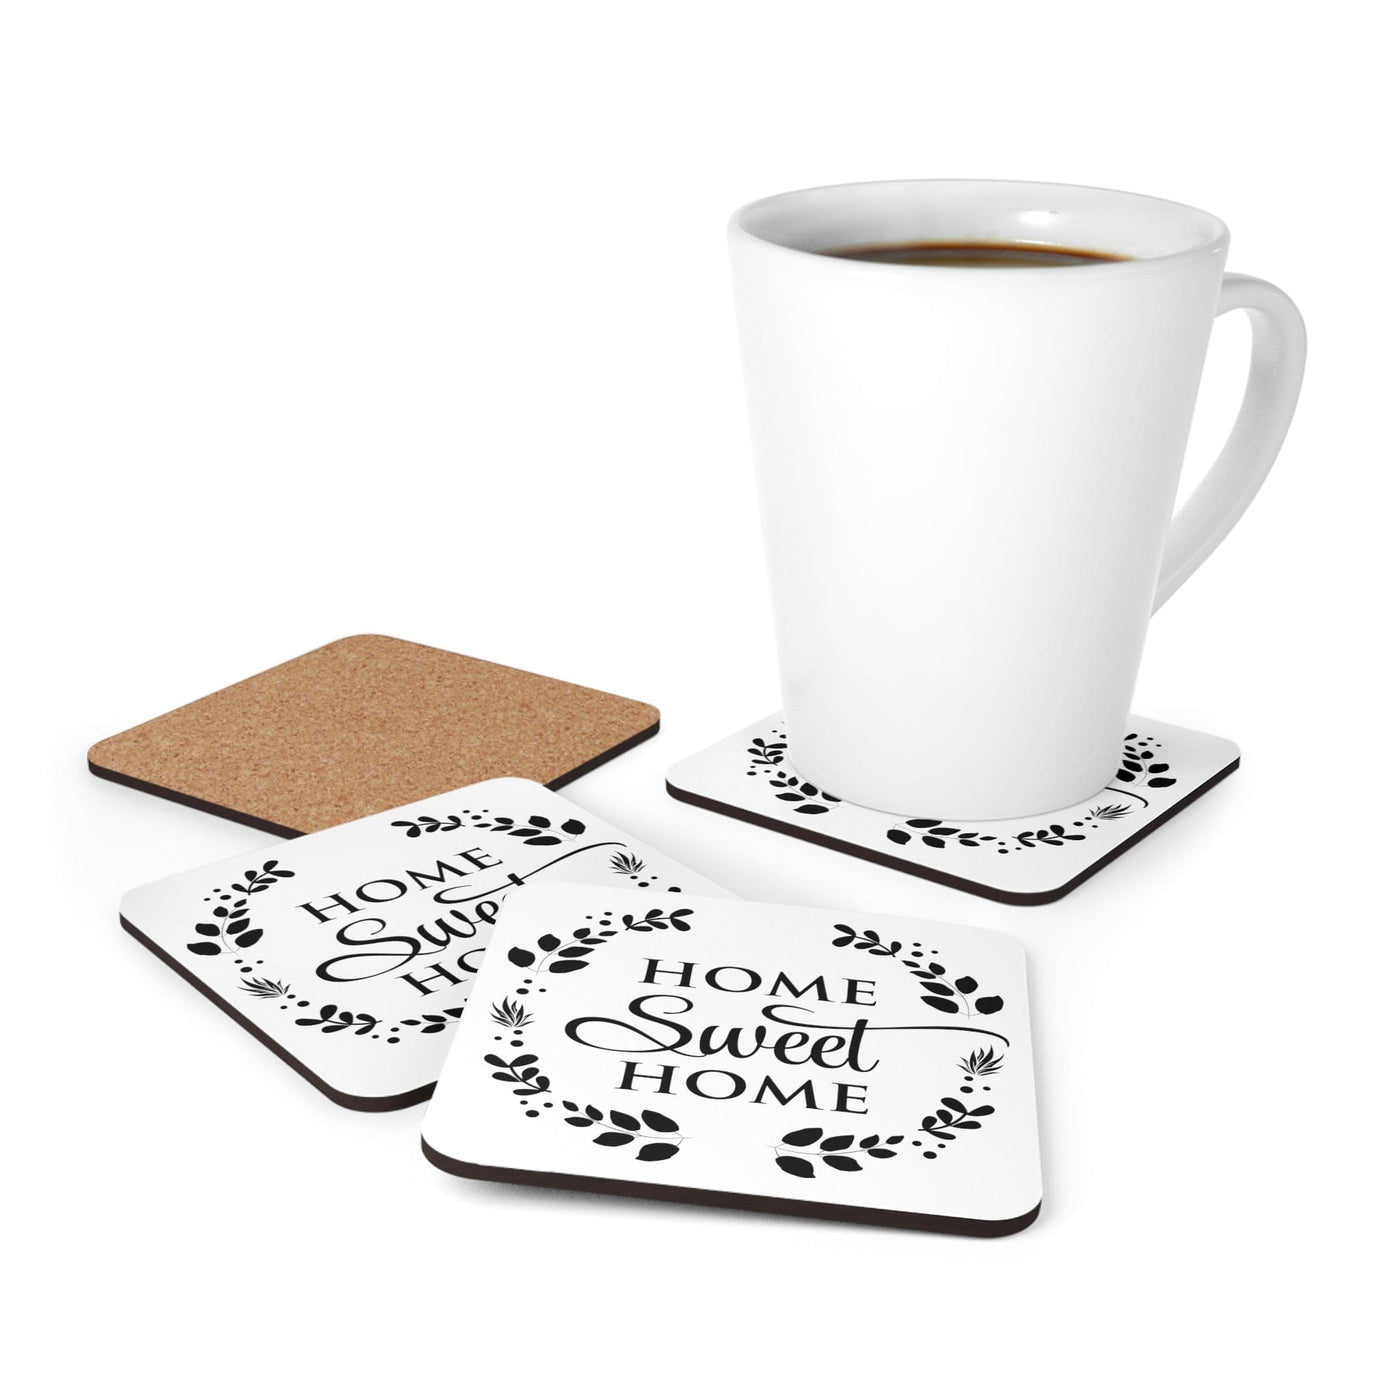 Coaster Set Of 4 For Drinks Home Sweet - Decorative | Coasters